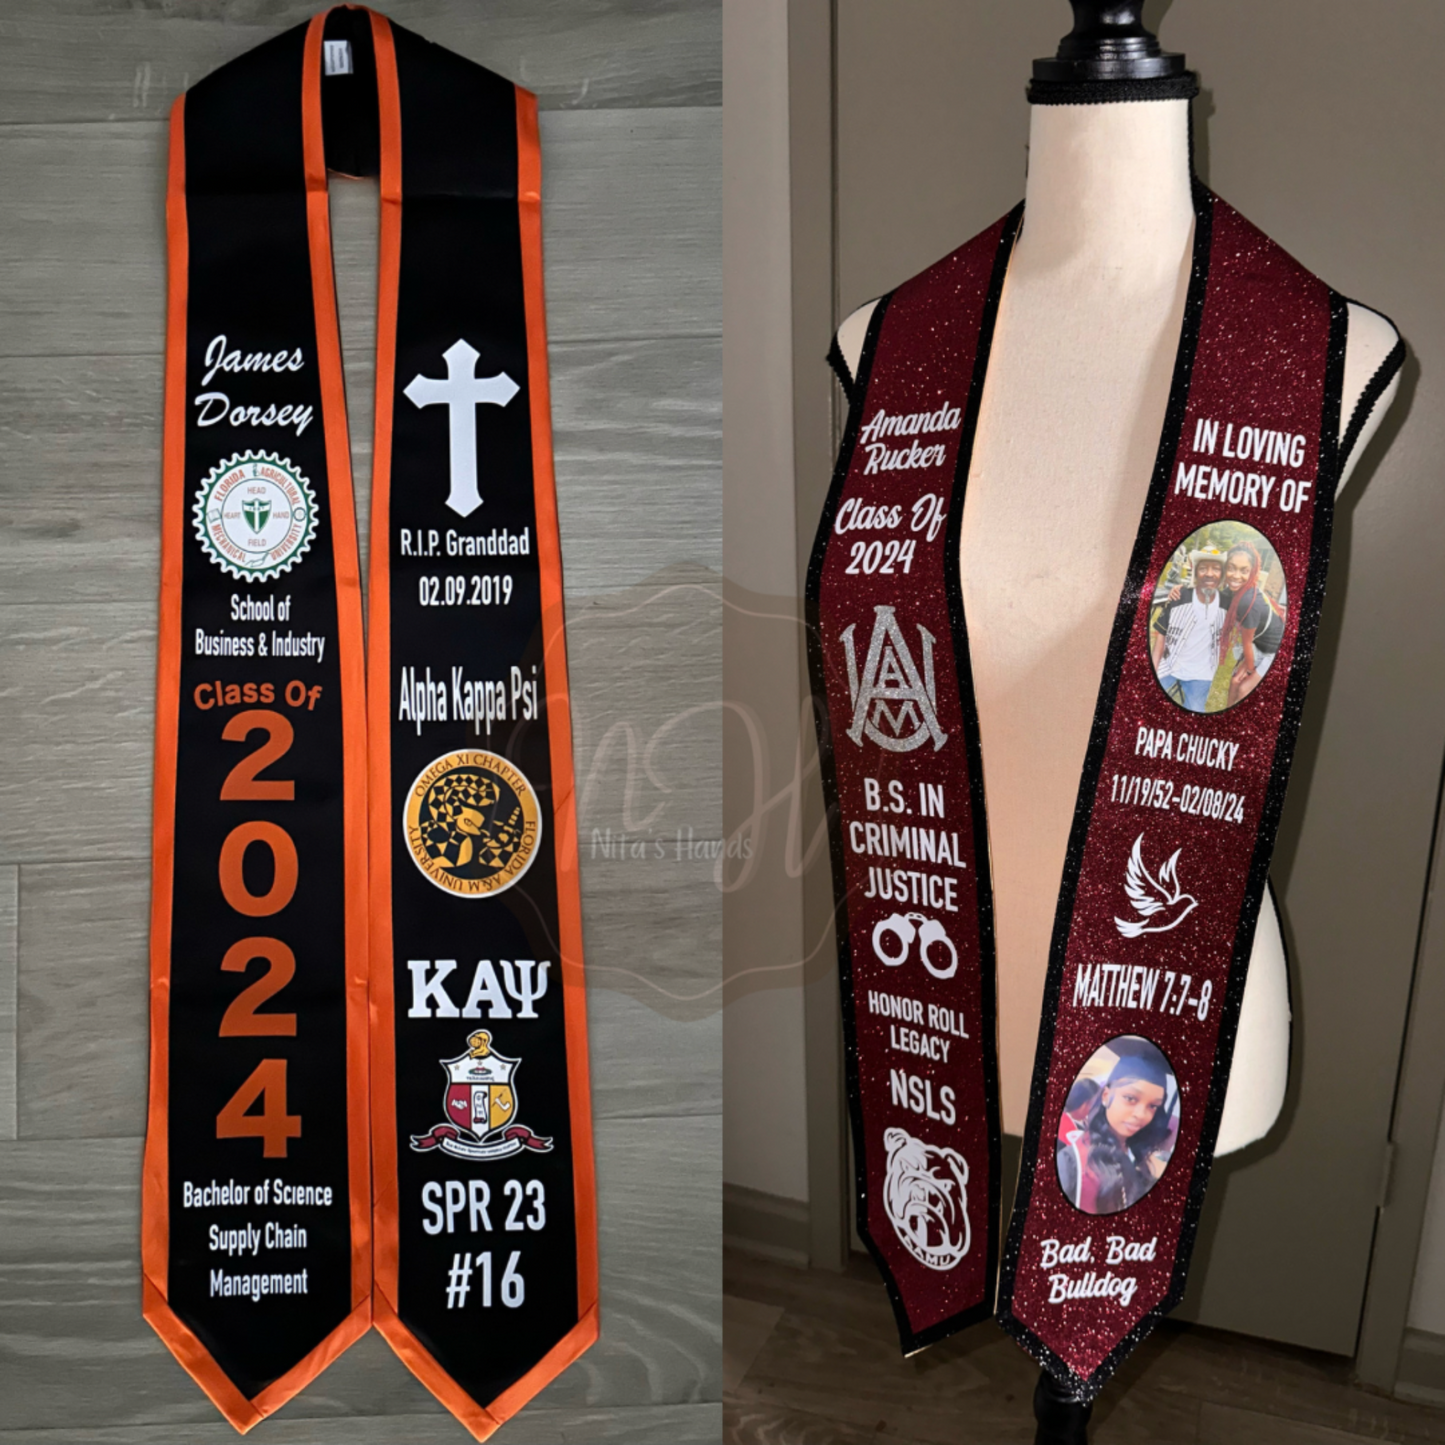 CLICK ITEM & FILL OUT FORM BEFORE ADDING TO CART • Unlimited Design Custom Graduation Stole $150